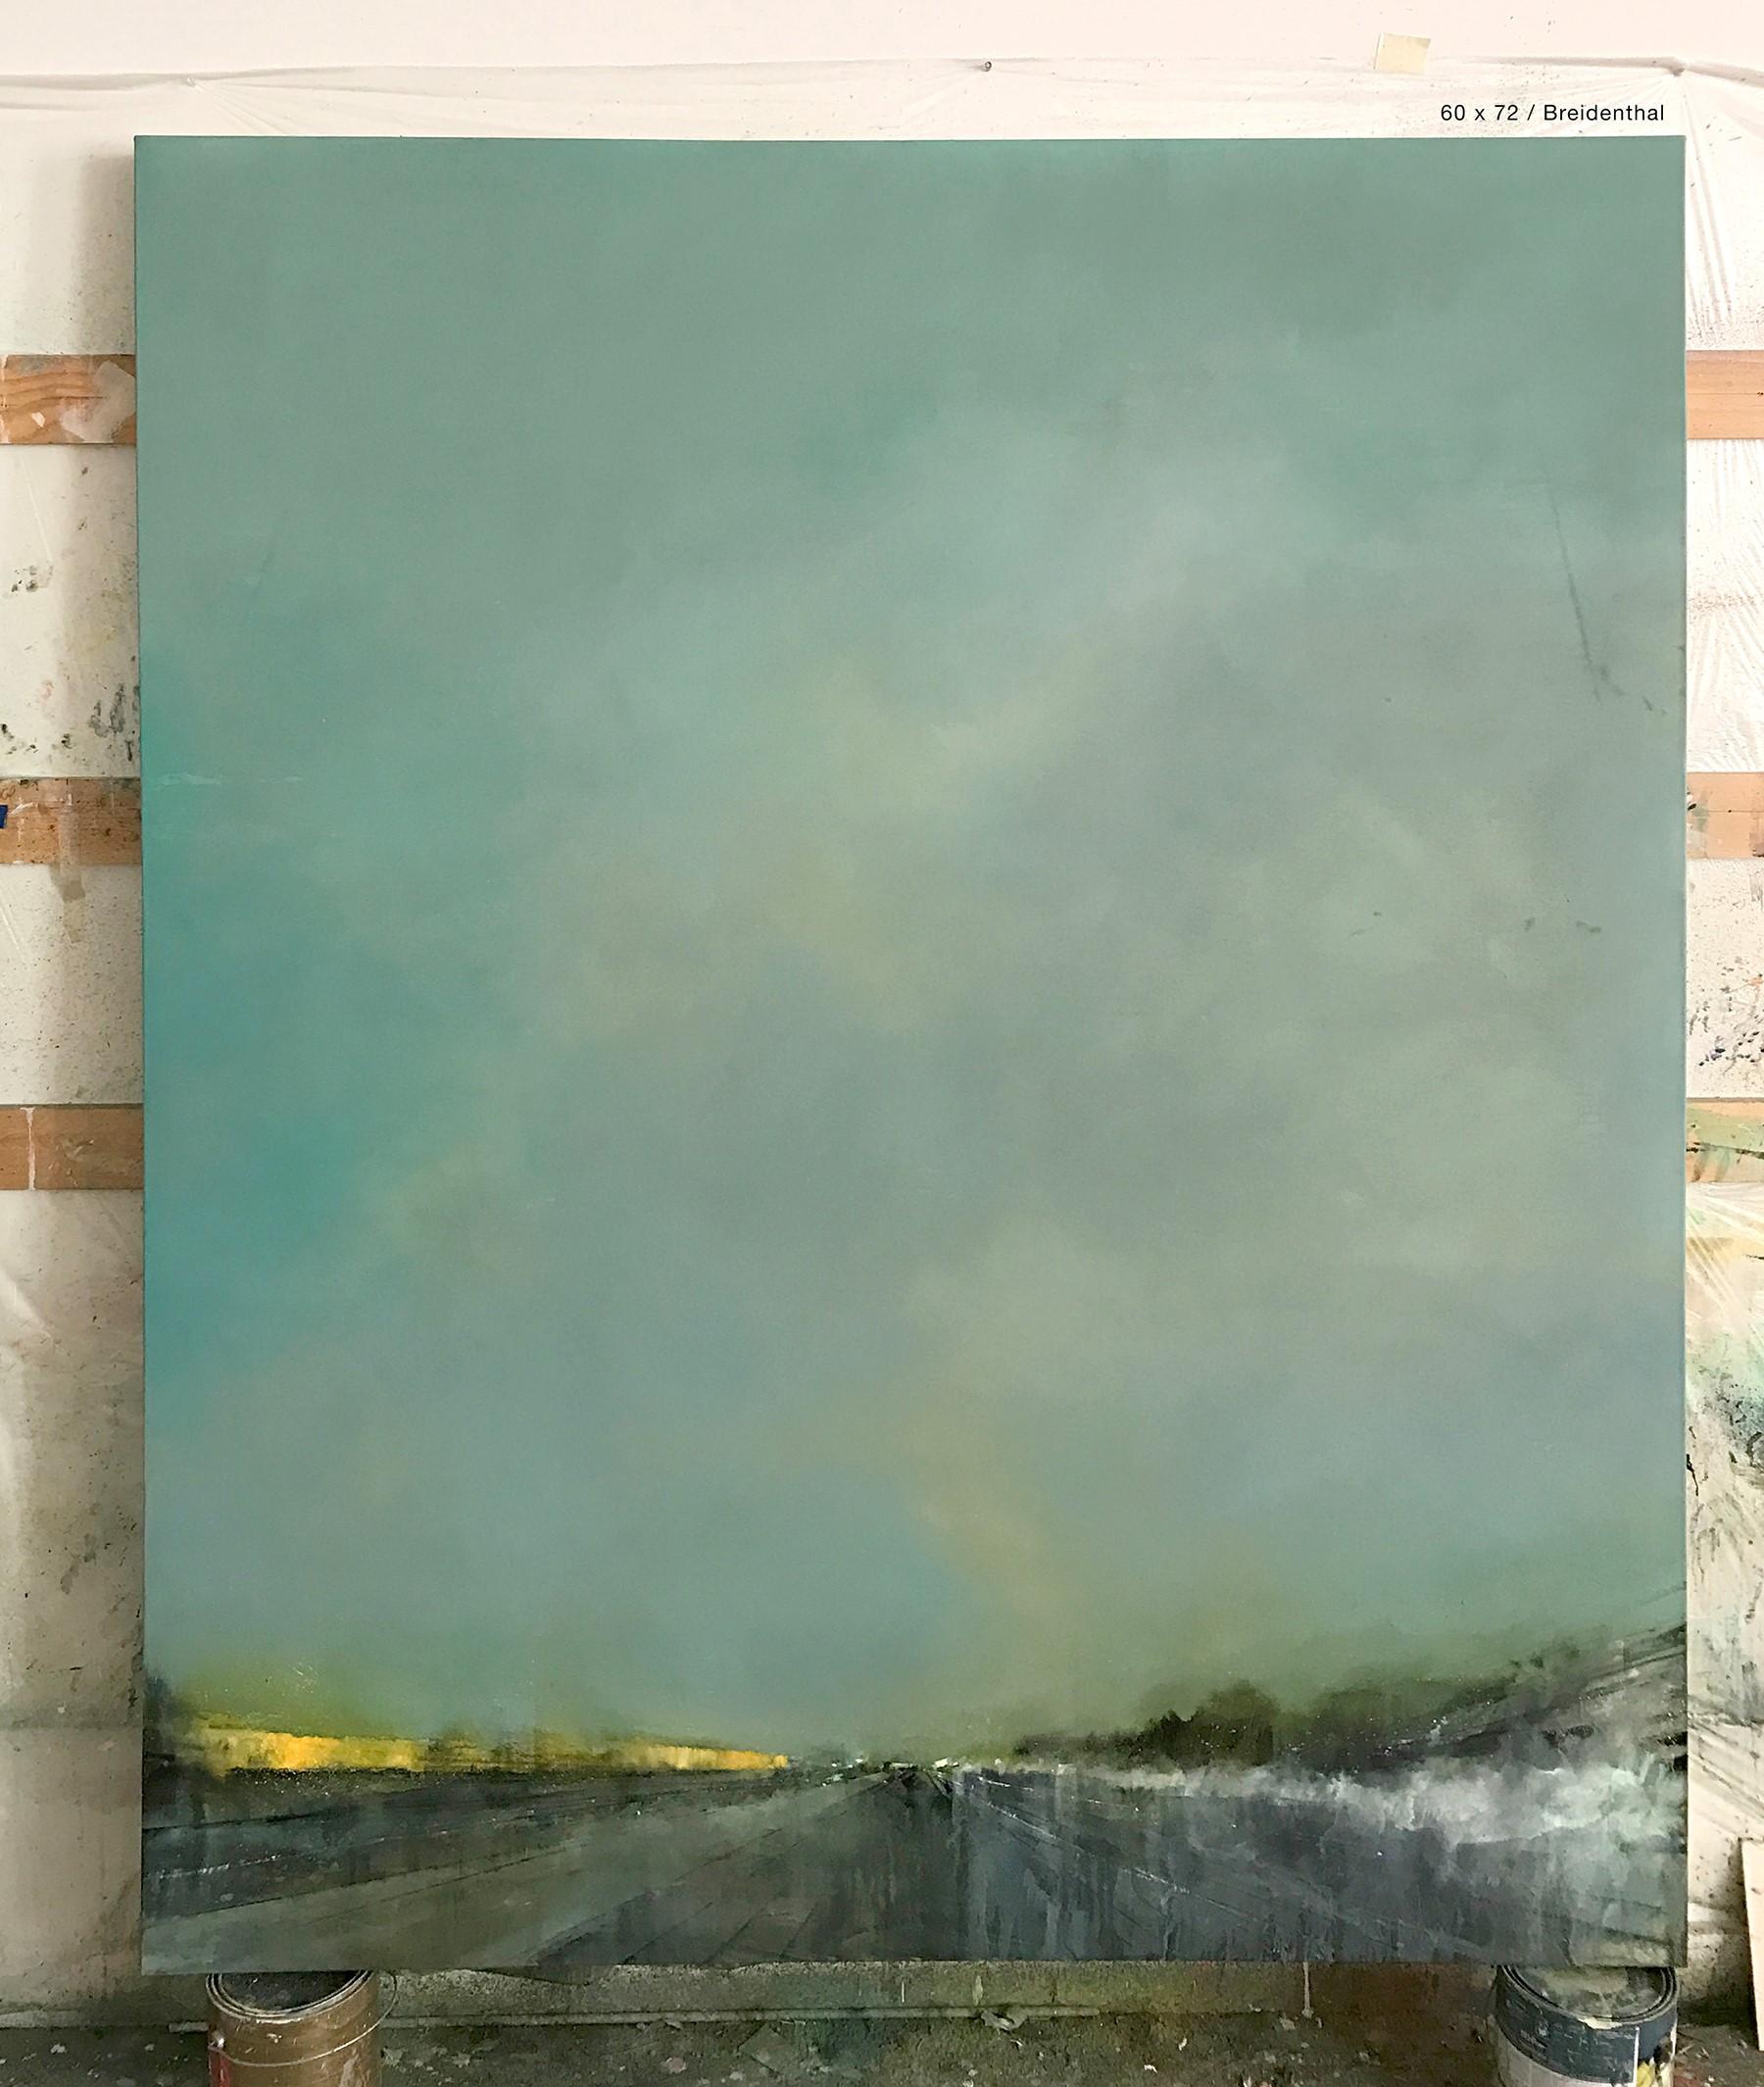 Soaked (Diffused light large scale abstract landscape oil on canvas) - Painting by Derrick Breidenthal 